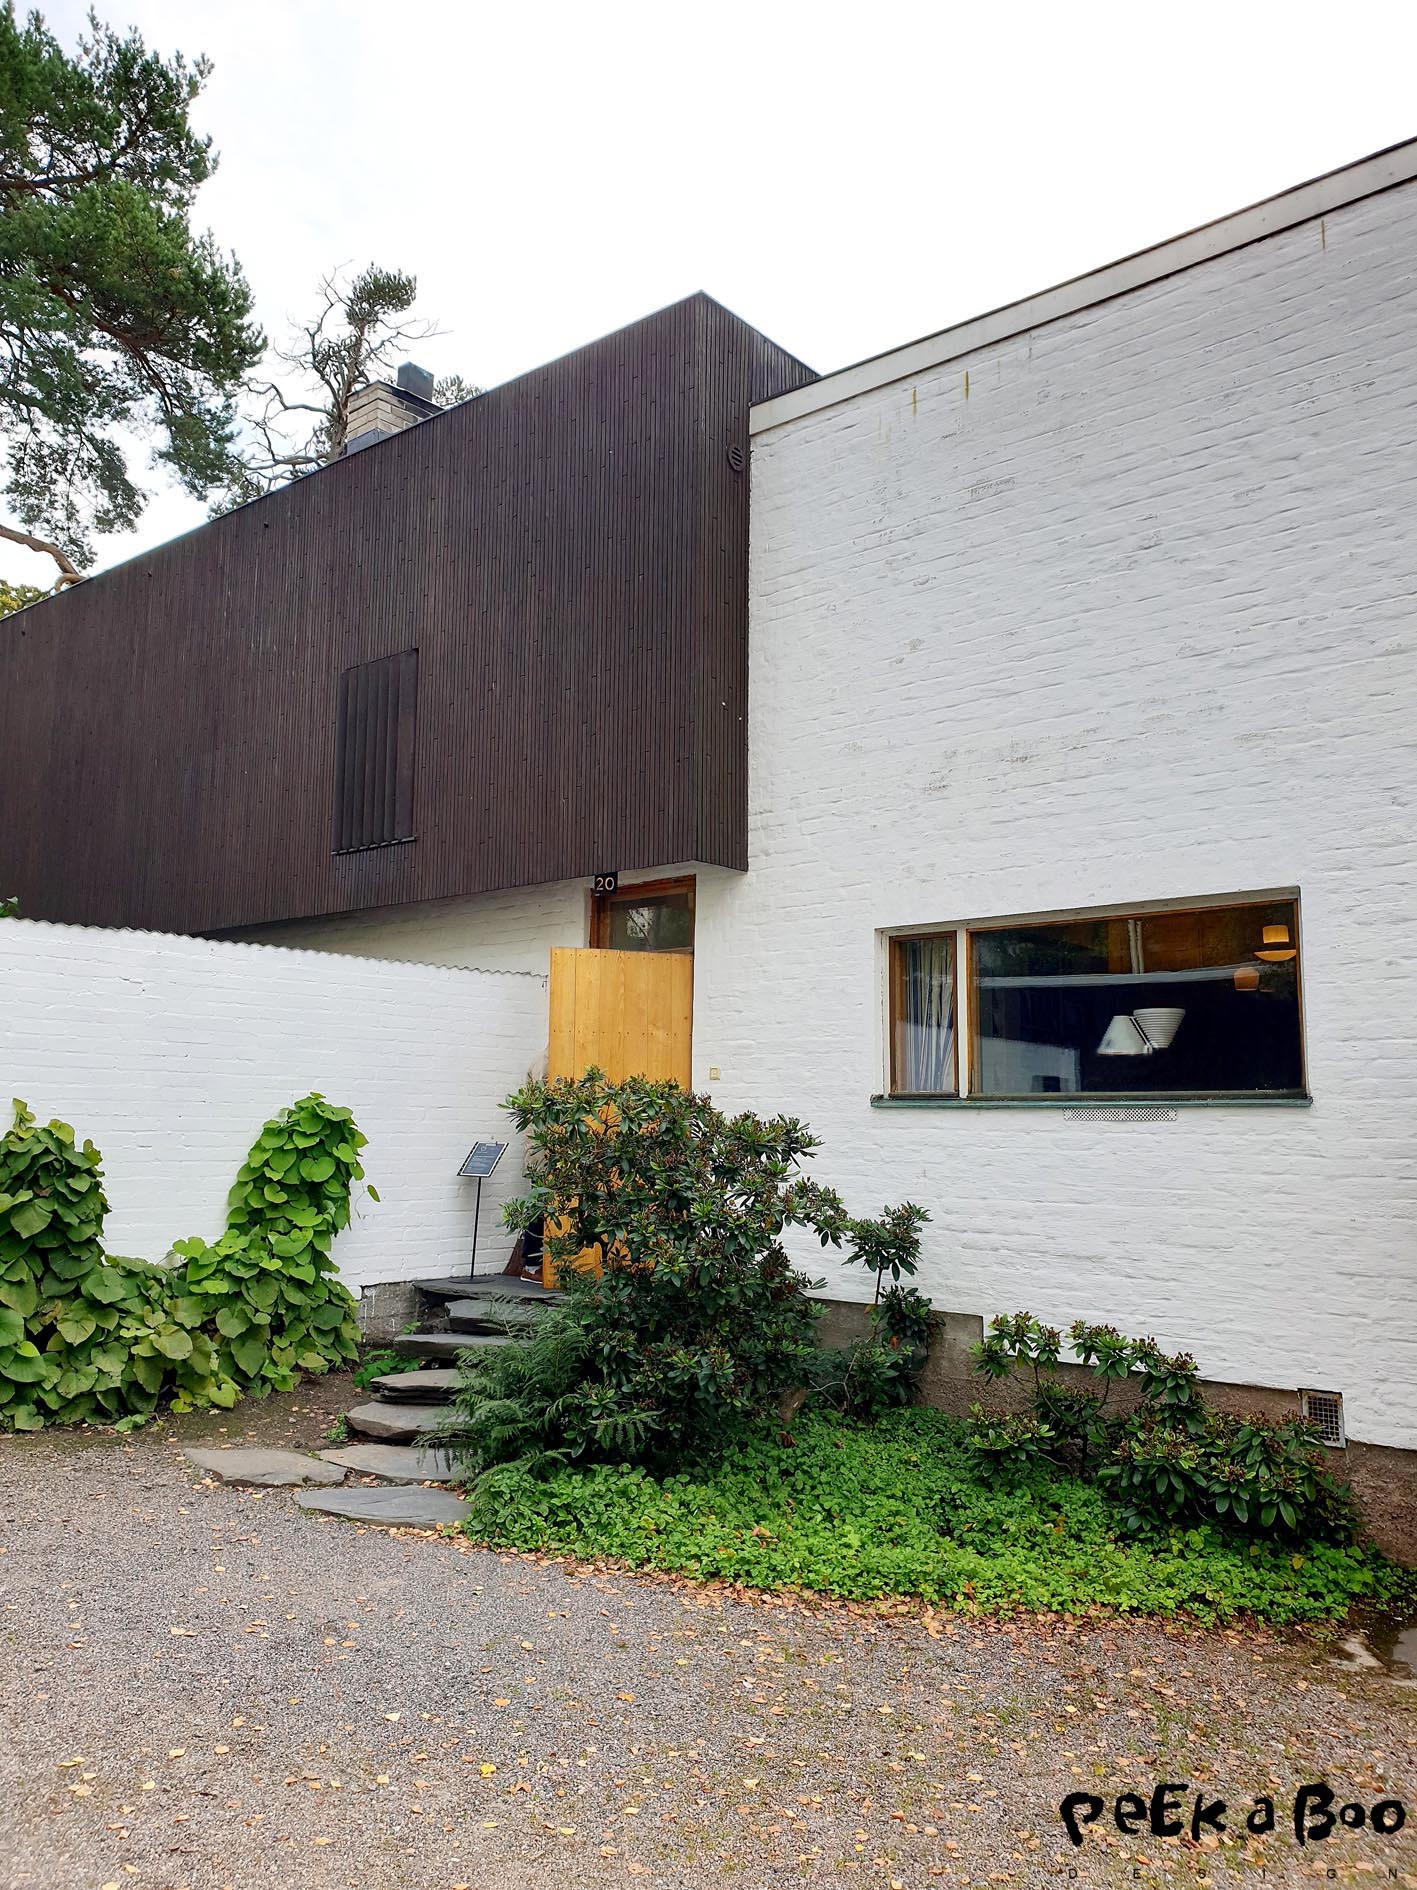 The house of Alvar Aalto designed by himself in 1936.